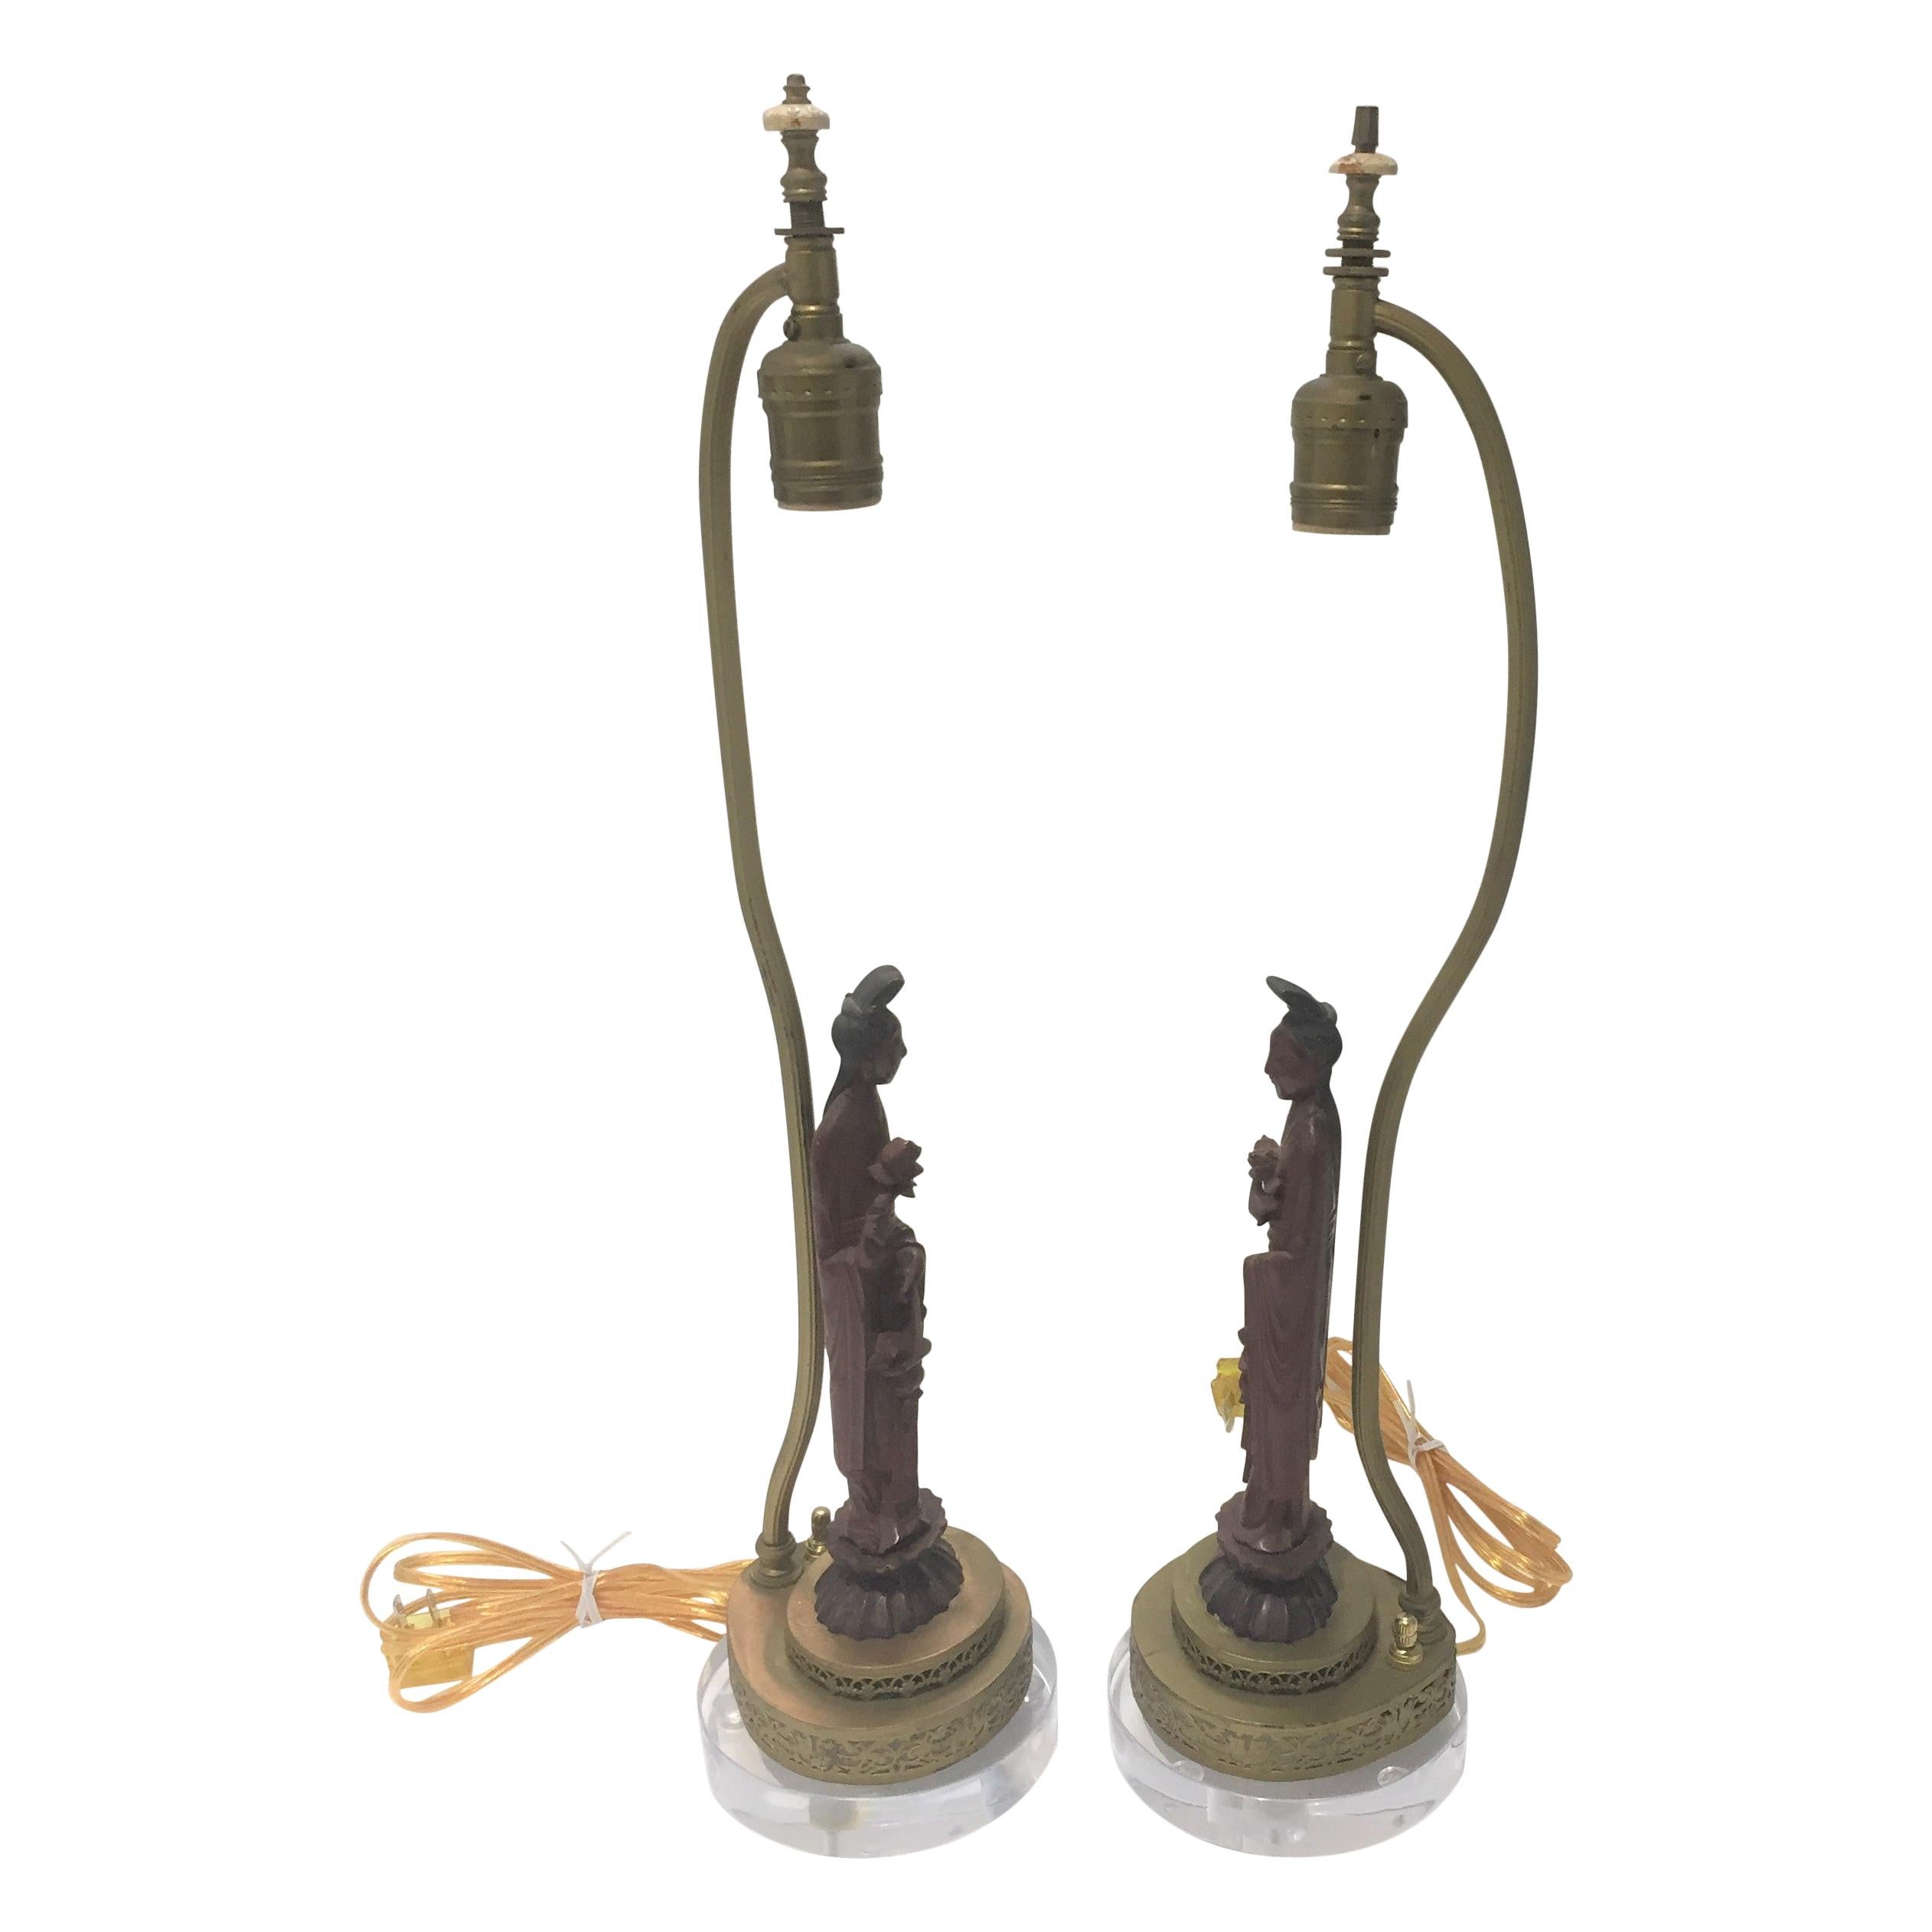 Pair of Art Deco Vanity Table Lamps with Quan Yin Figures